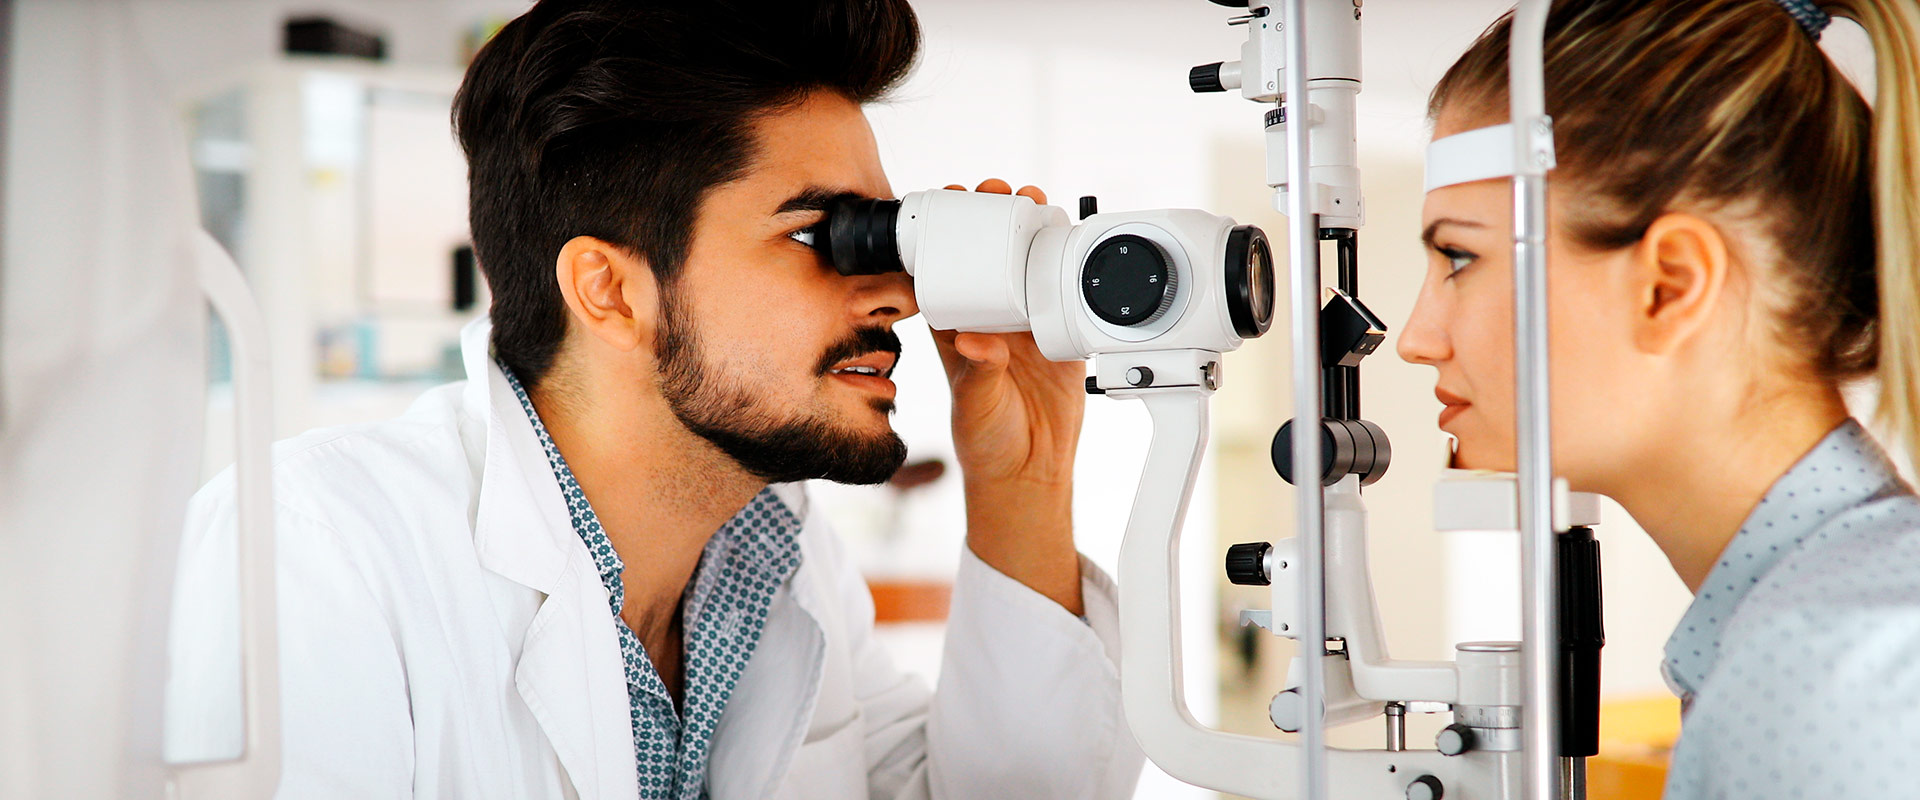 What is slit lamp in ophthalmology?